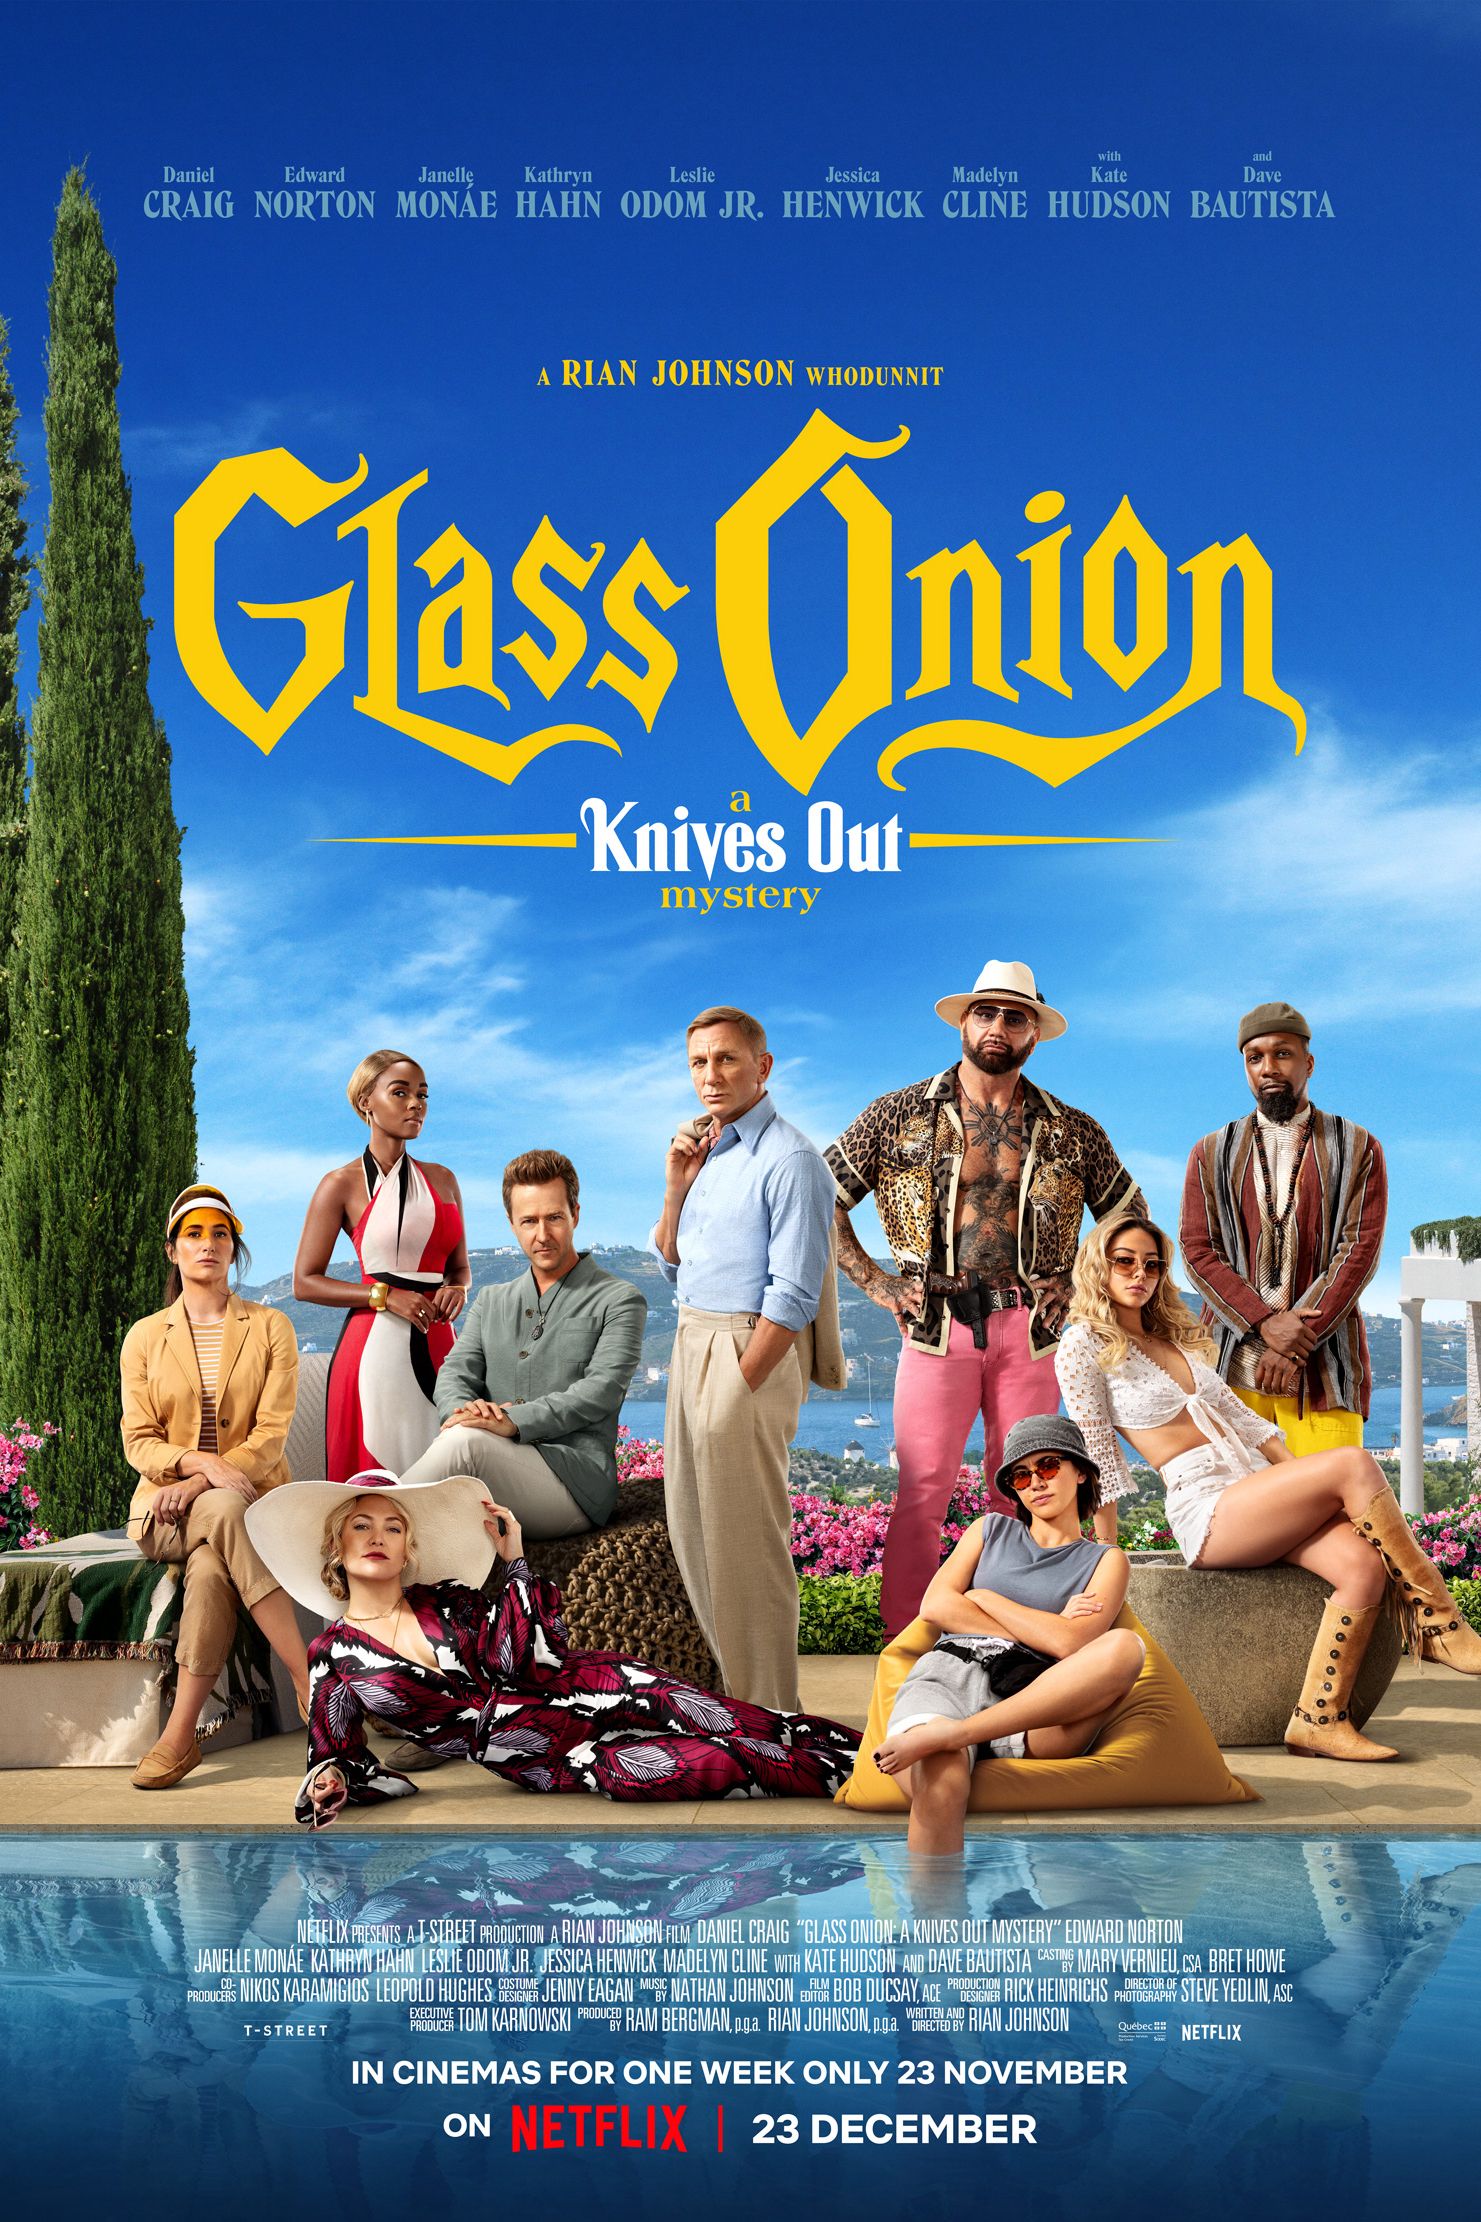 Glass Onion Scores A Major Achievement On Nielsen’s Streaming Charts